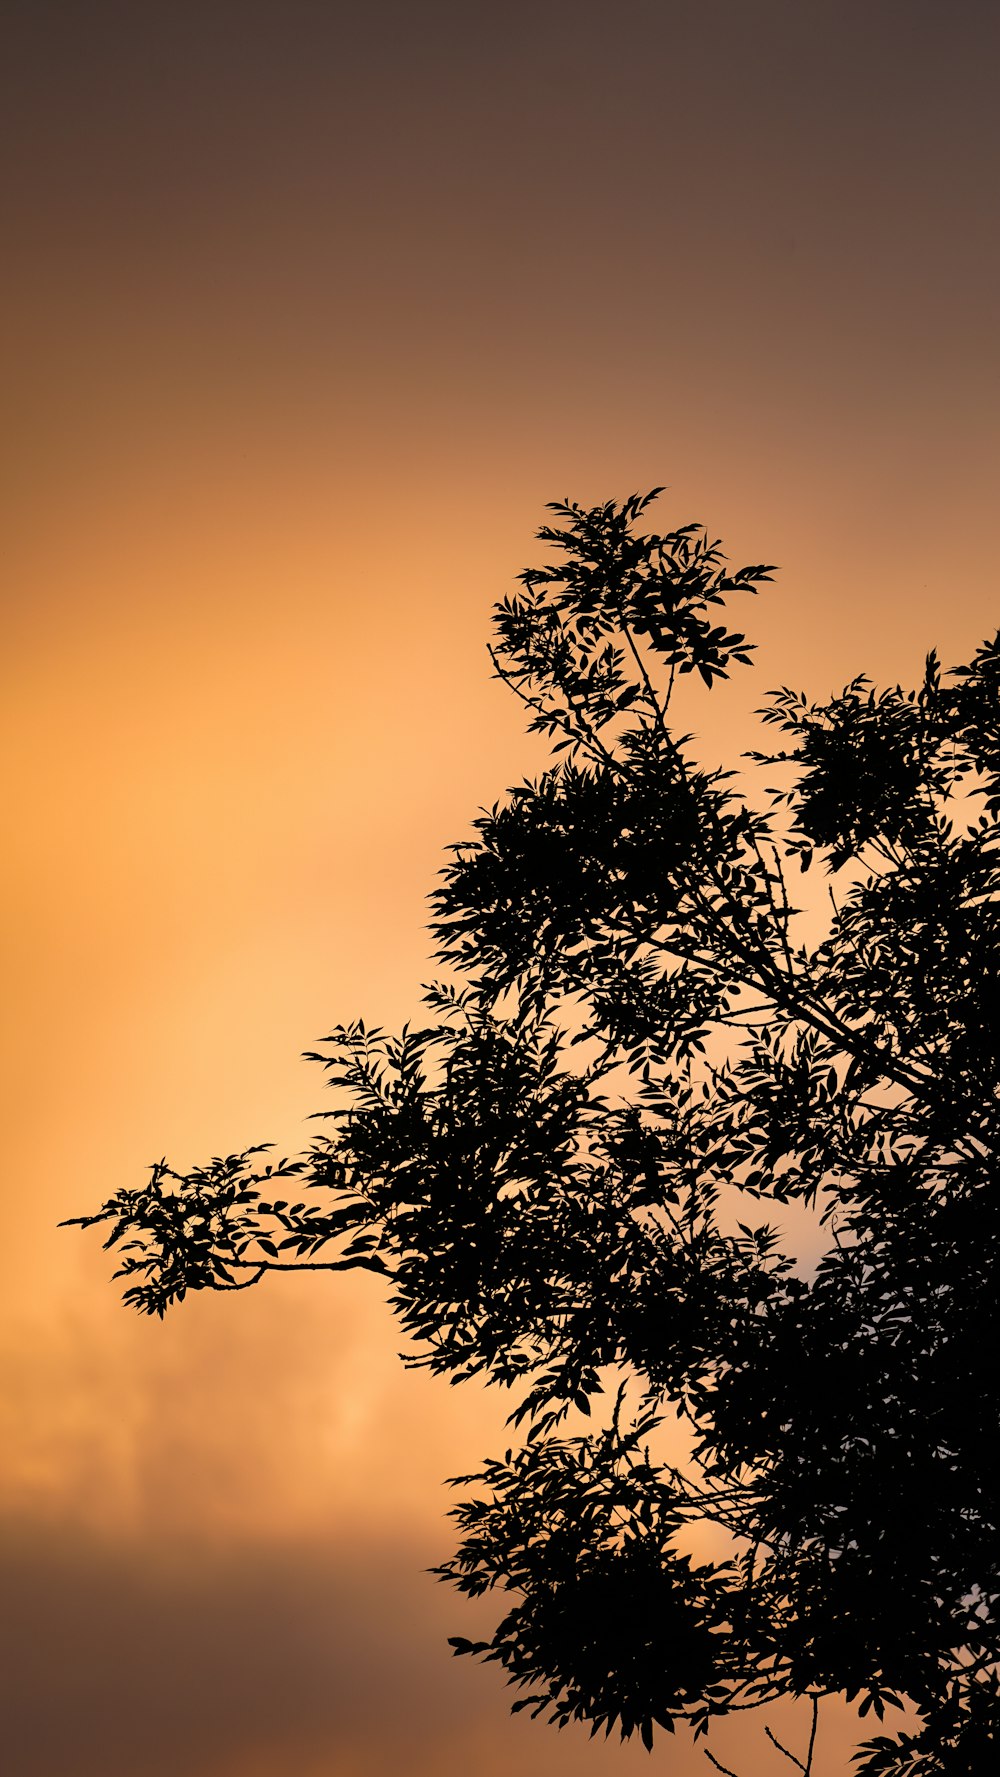 the silhouette of a tree against a sunset sky